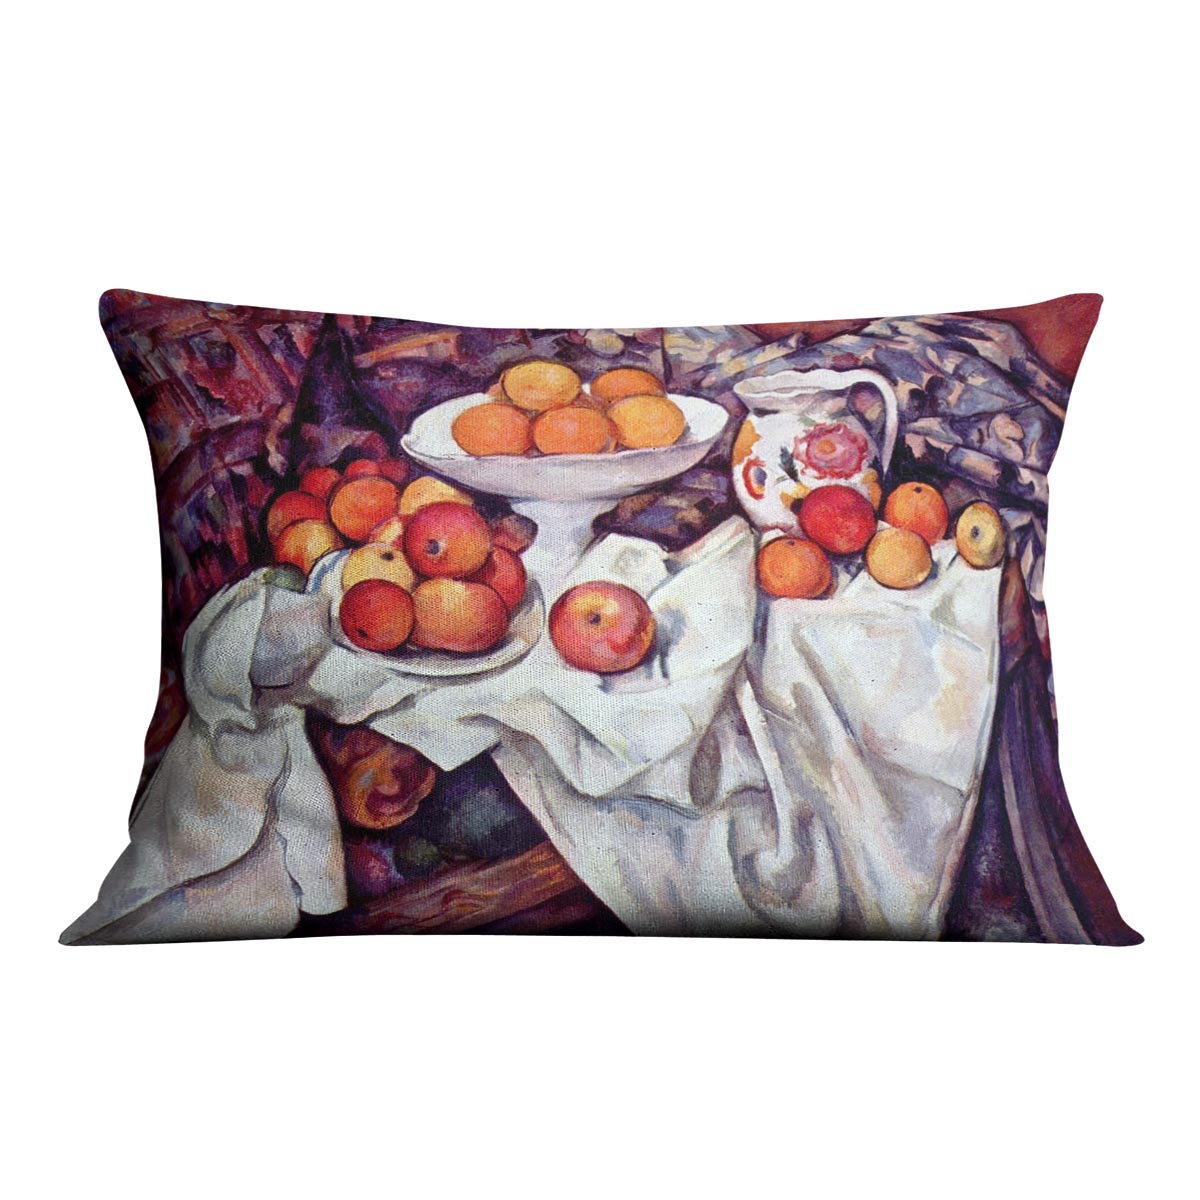 Still Life with Apples and Oranges by Cezanne Cushion - Canvas Art Rocks - 4